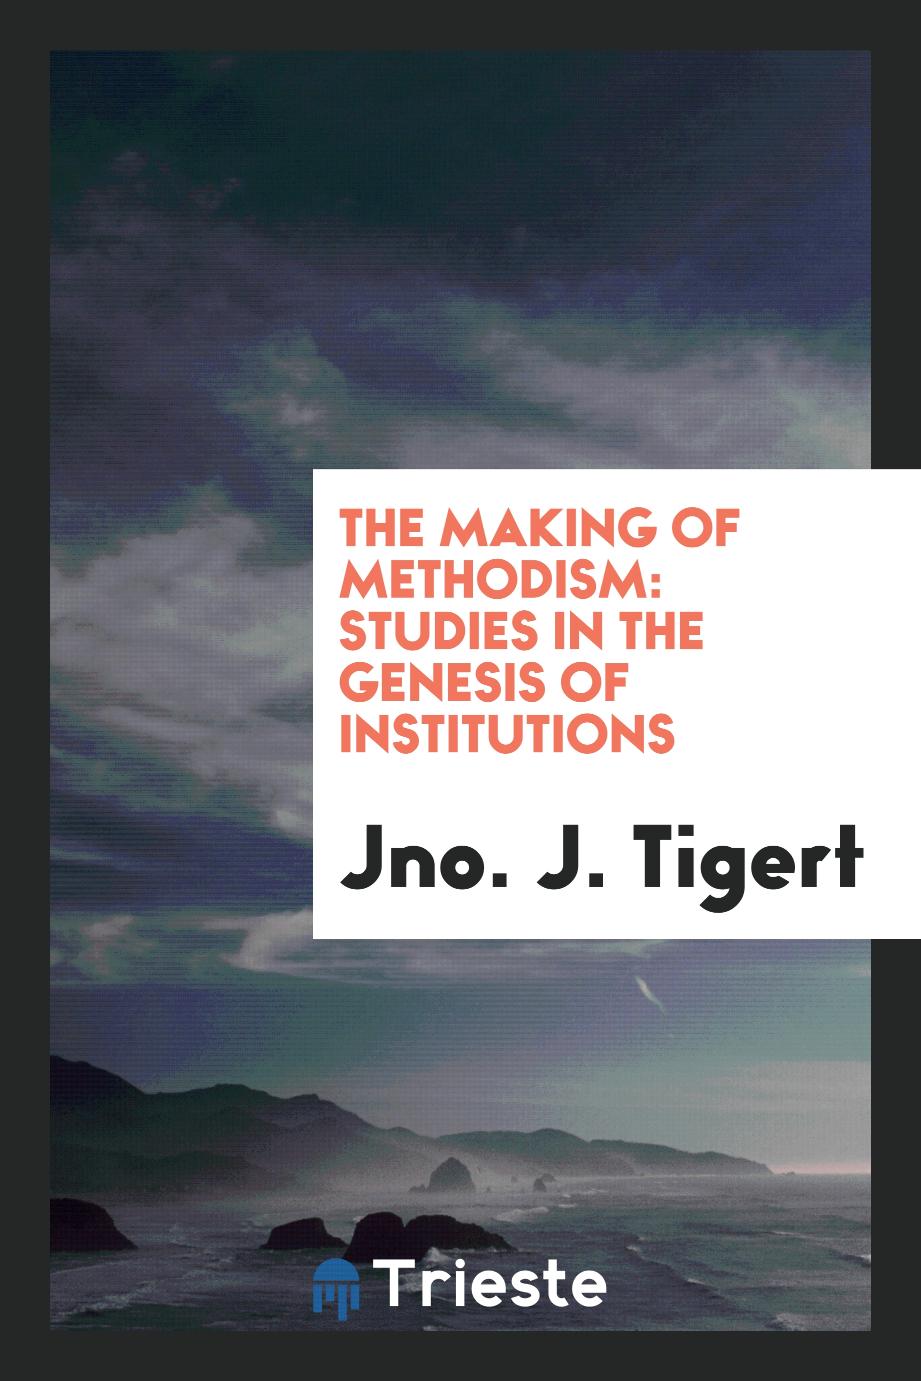 The making of Methodism: studies in the genesis of institutions